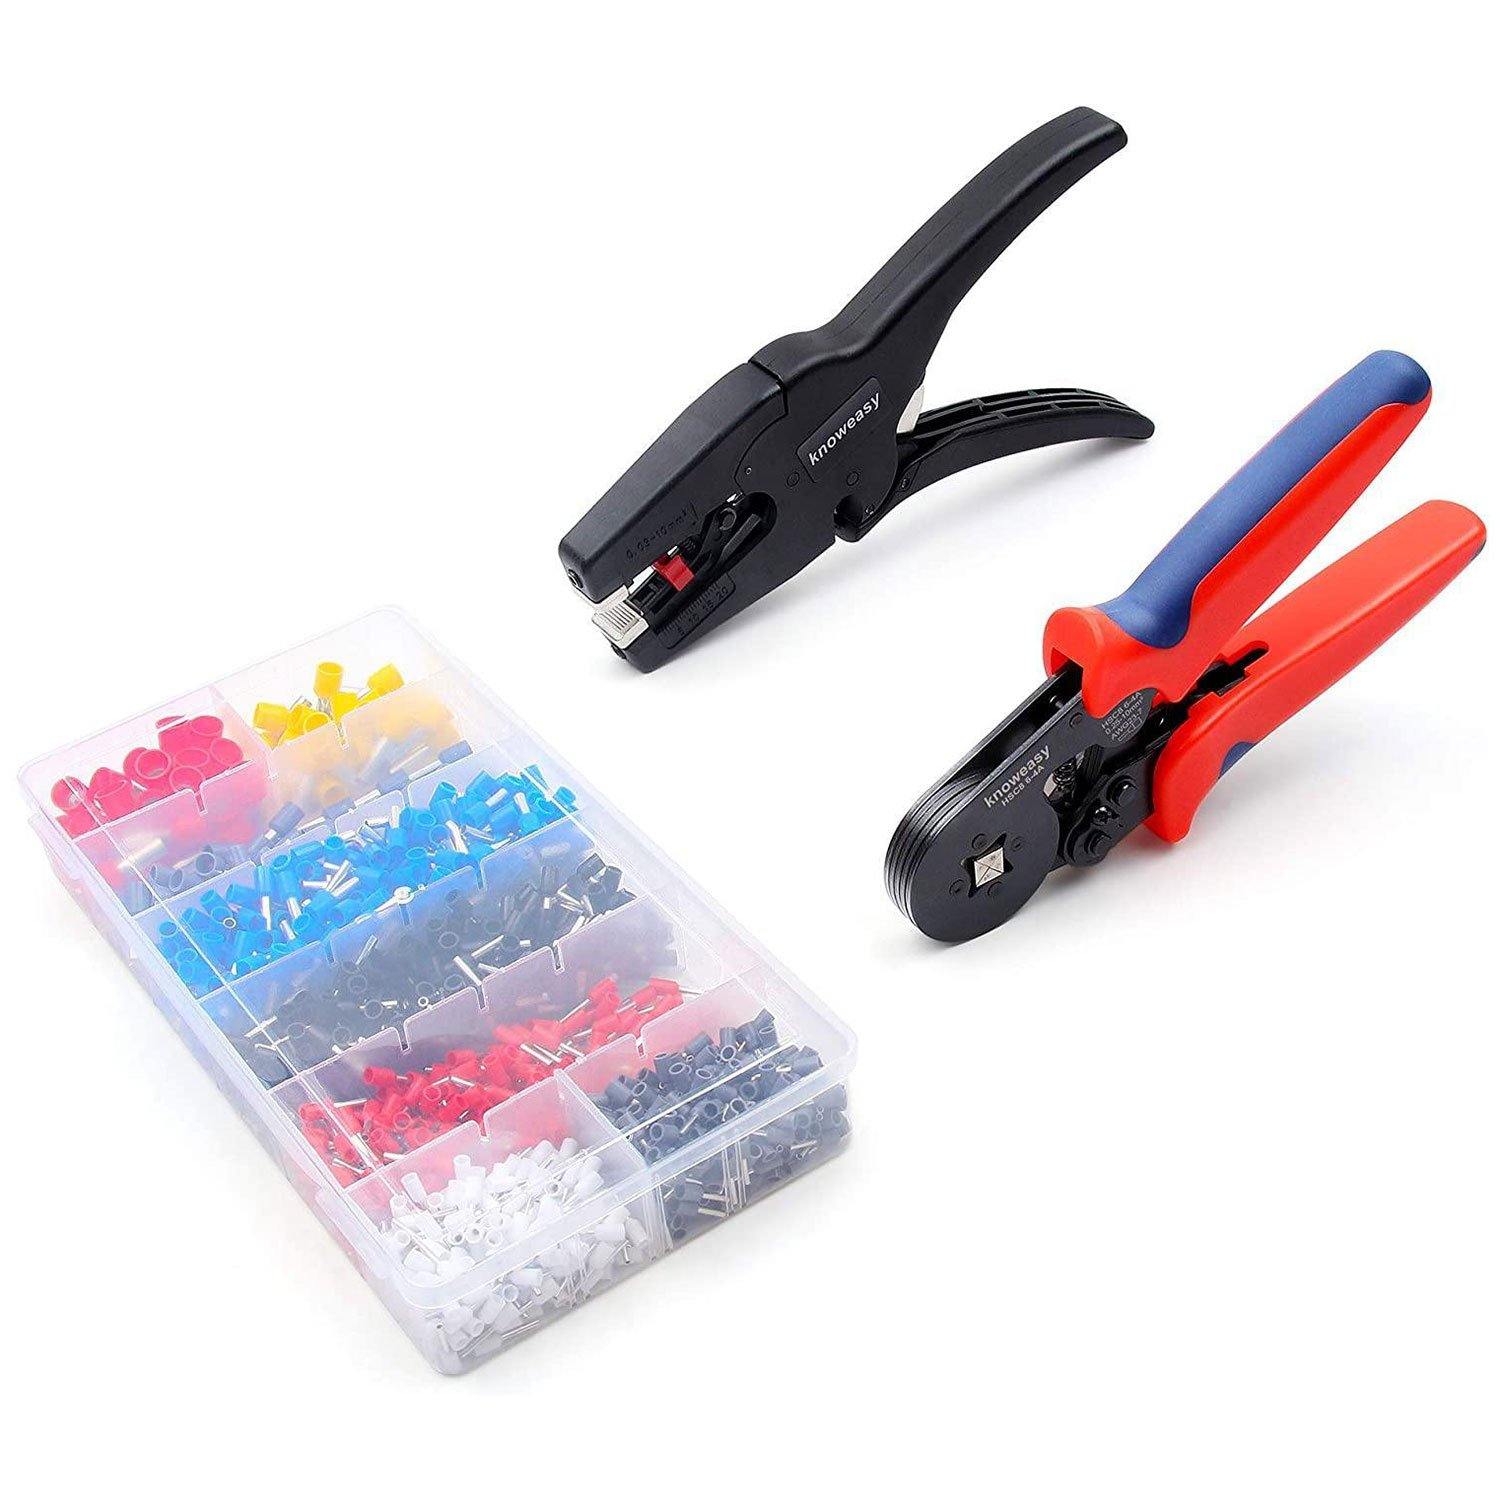 6-25mm² Crimping Tool Ratchet Crimper Cable Wire Terminals Electrical Plier